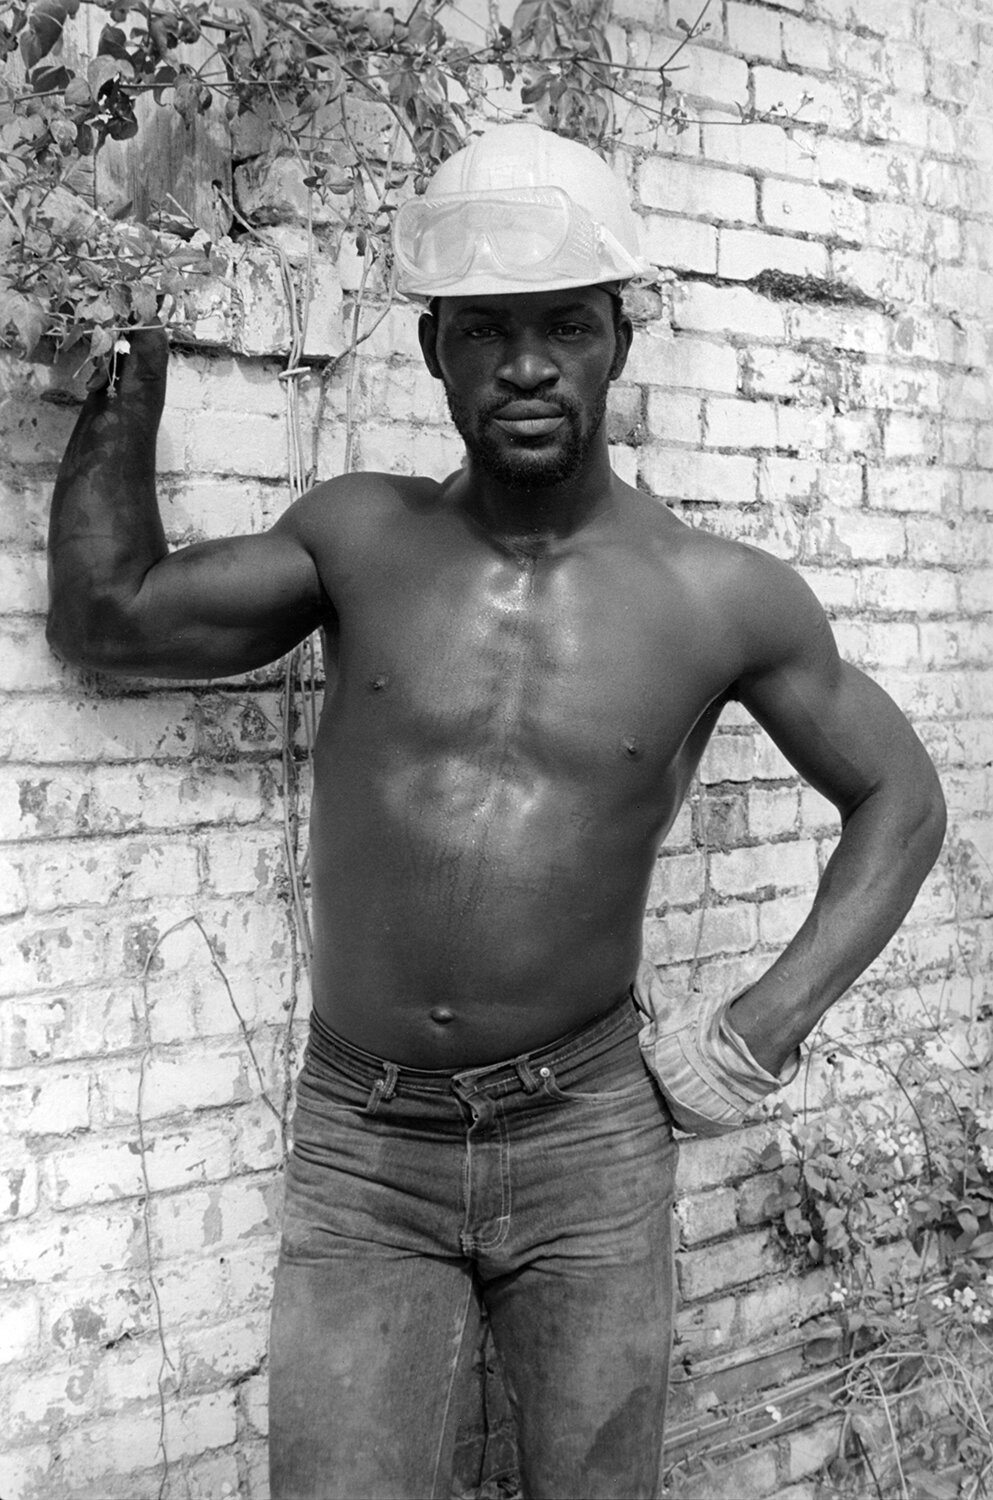   Construction Worker , 1983 Silver Gelatin Print 14 x 11 in. (paper size) The Do Good Fund, Inc., 2017-63 